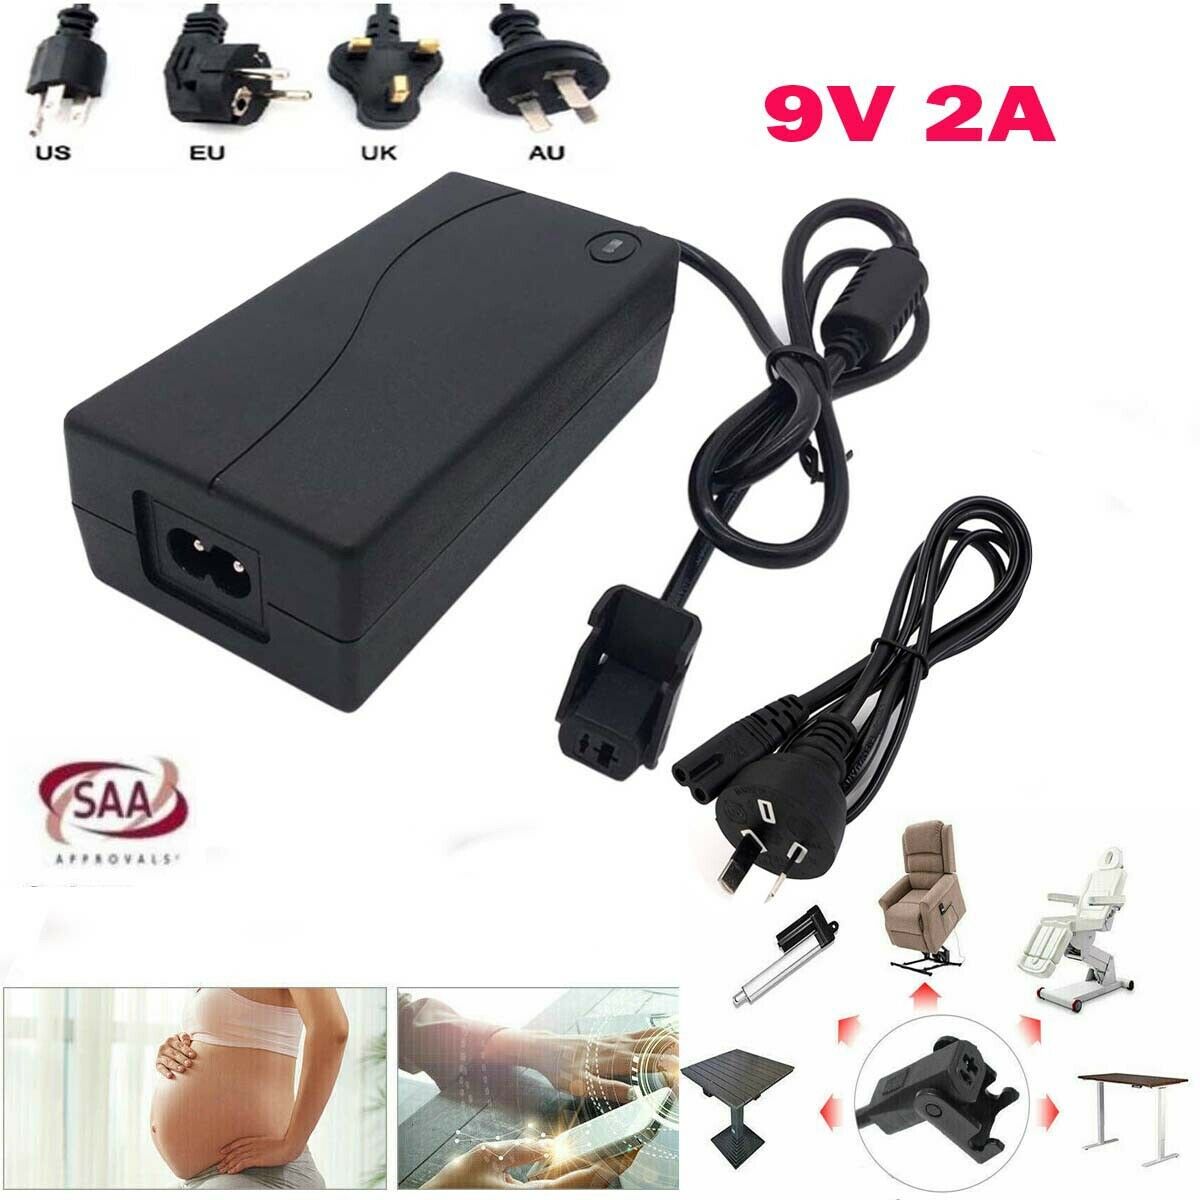 29V AC/DC Power Supply Electric Recliner Sofa Lift Chair Adapter Transformer US Brand: Unbranded Type: 29V 2A AC/DC